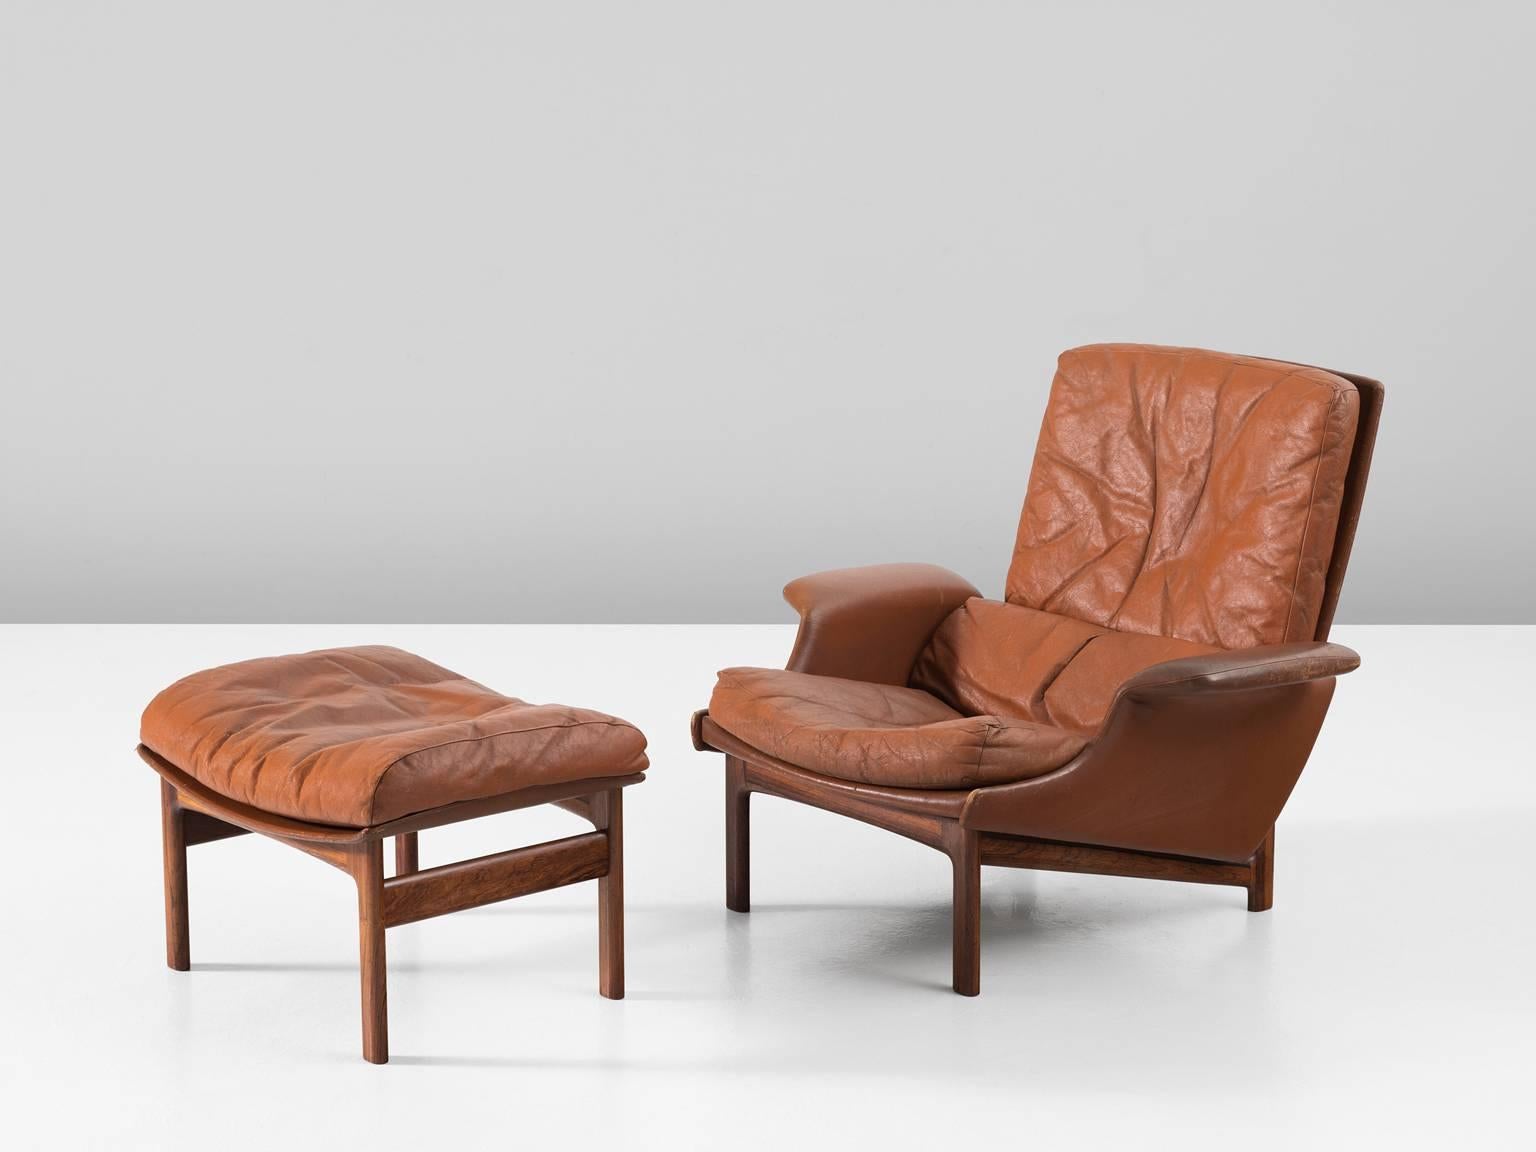 Adam lounge chair, in leather and teak by Ib Kofod-Larsen for Mogens Kold Møbelfabrik, Denmark, 1958. 

Extraordinary lounge chair accompanied by an ottoman. Rare to find as a pair. This very comfortable high back chair comes with characteristic